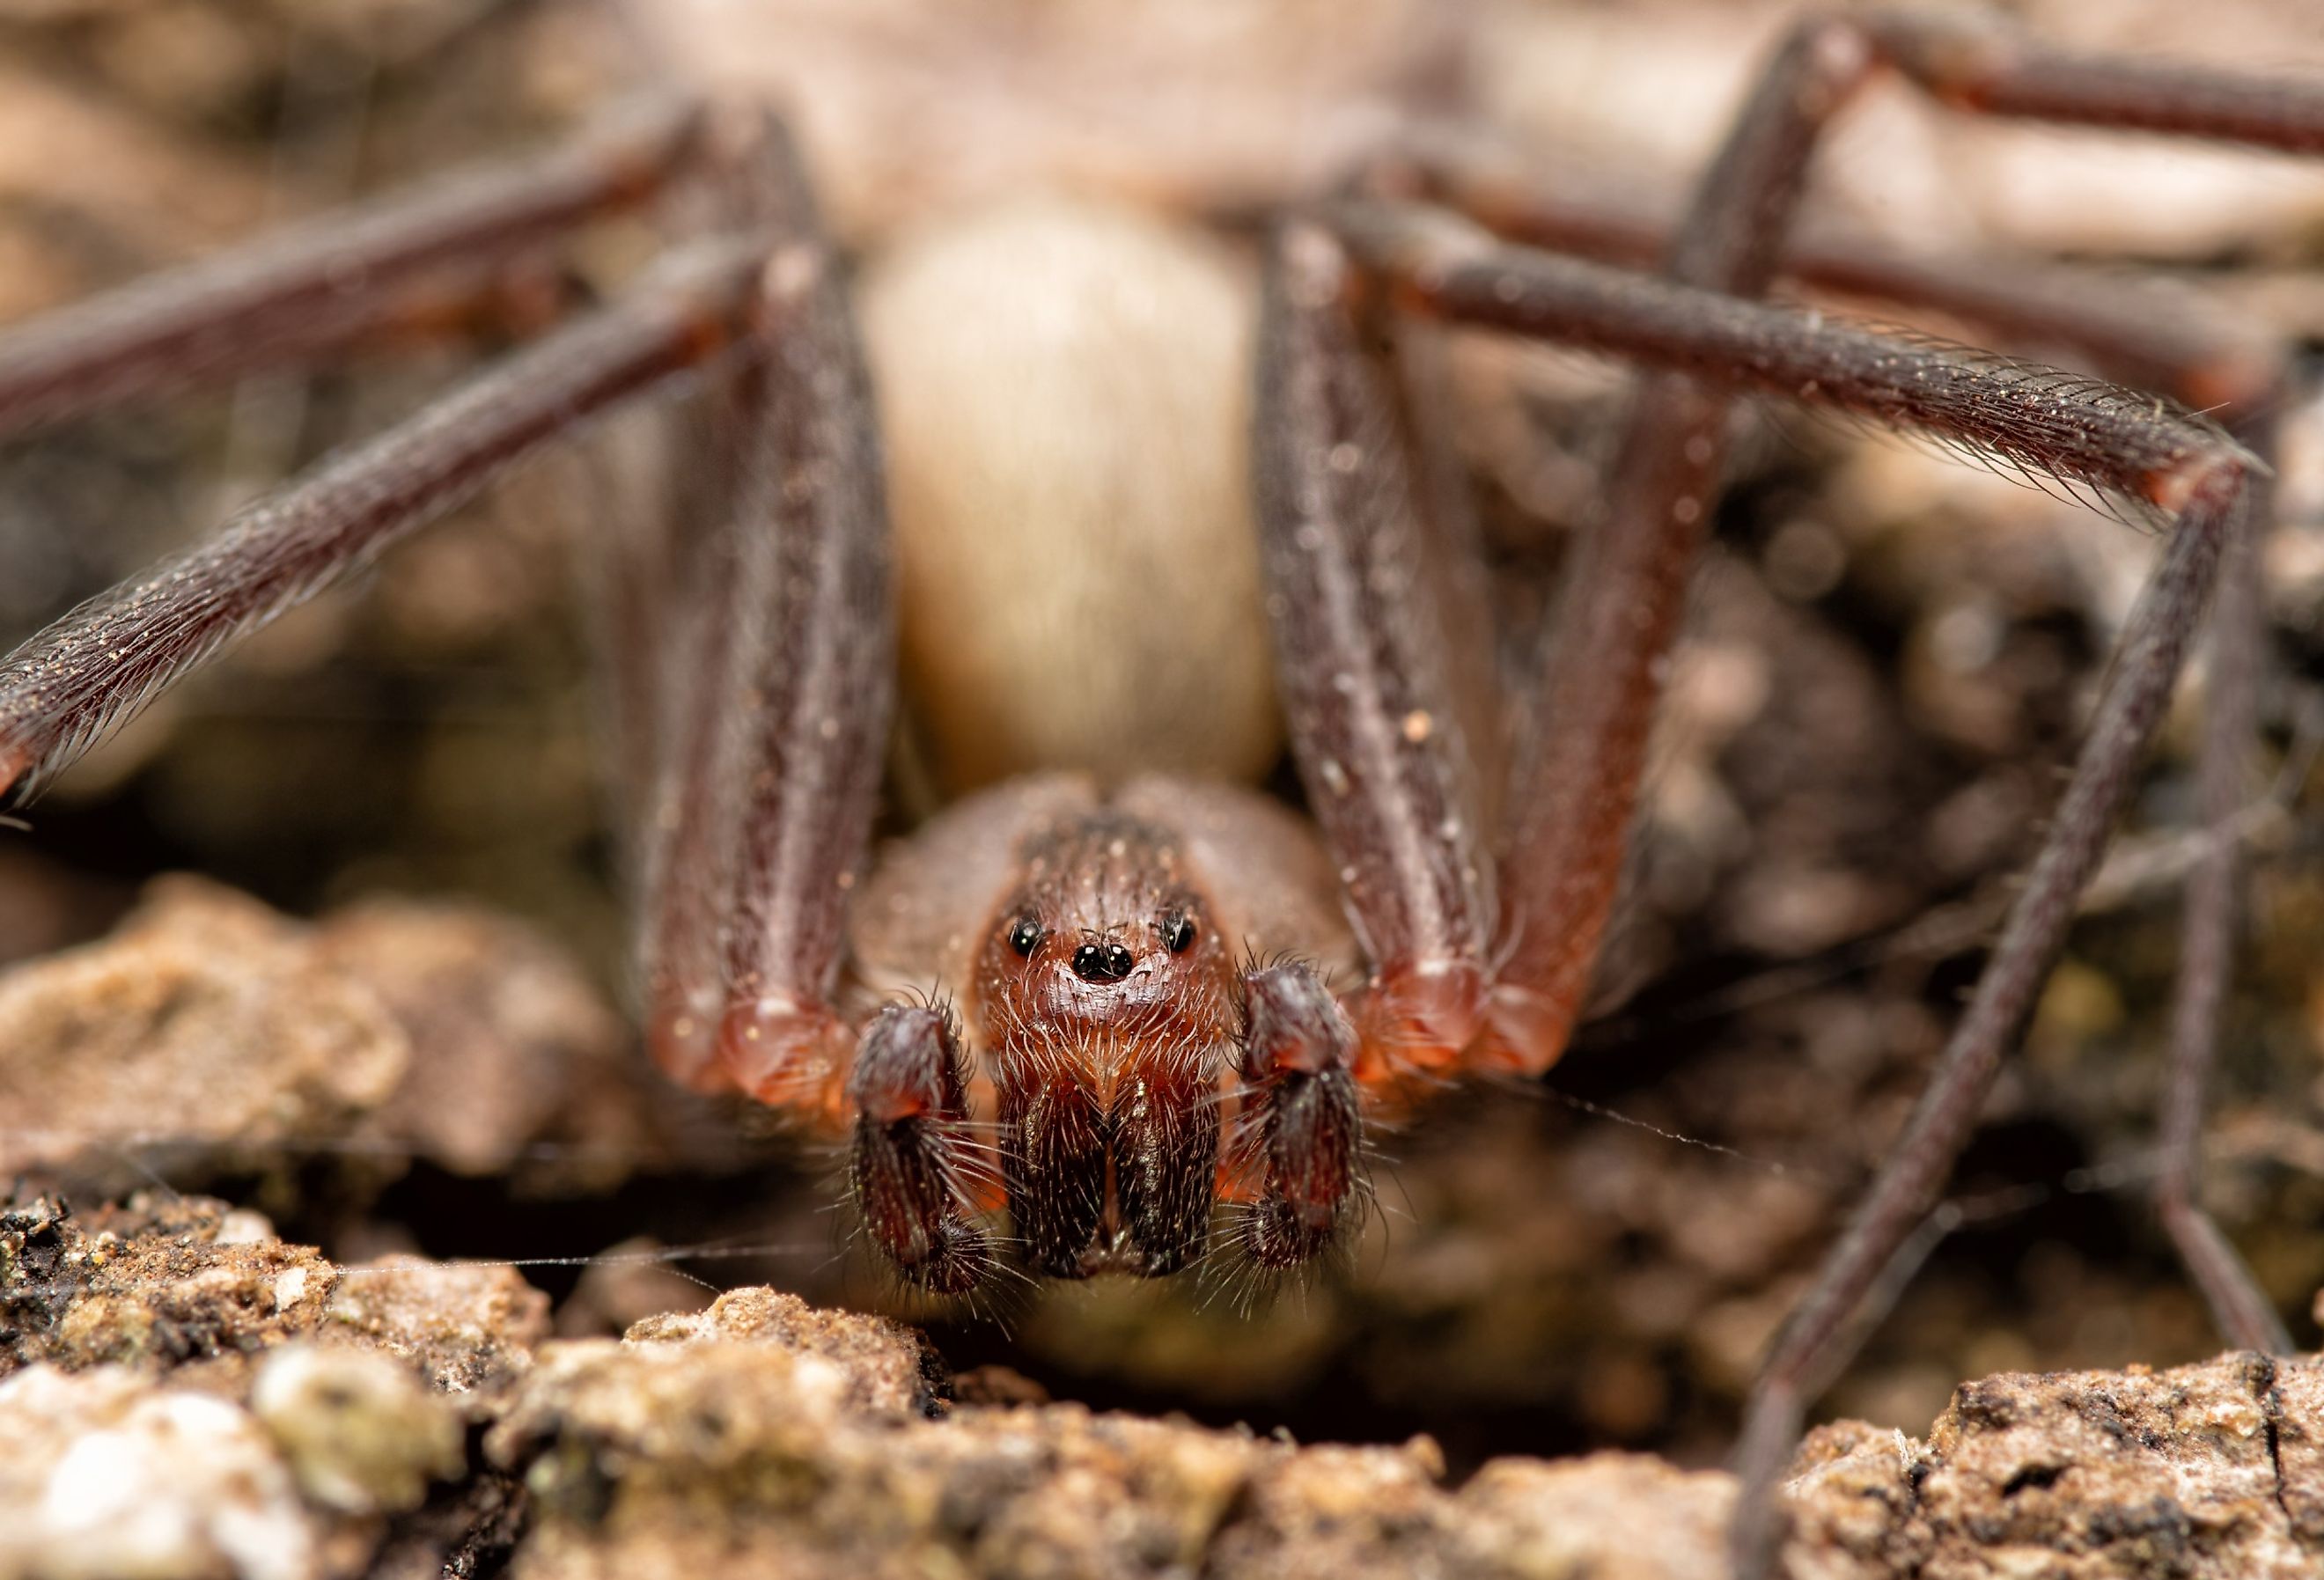 Know the risks of encountering black widow, brown recluse spiders